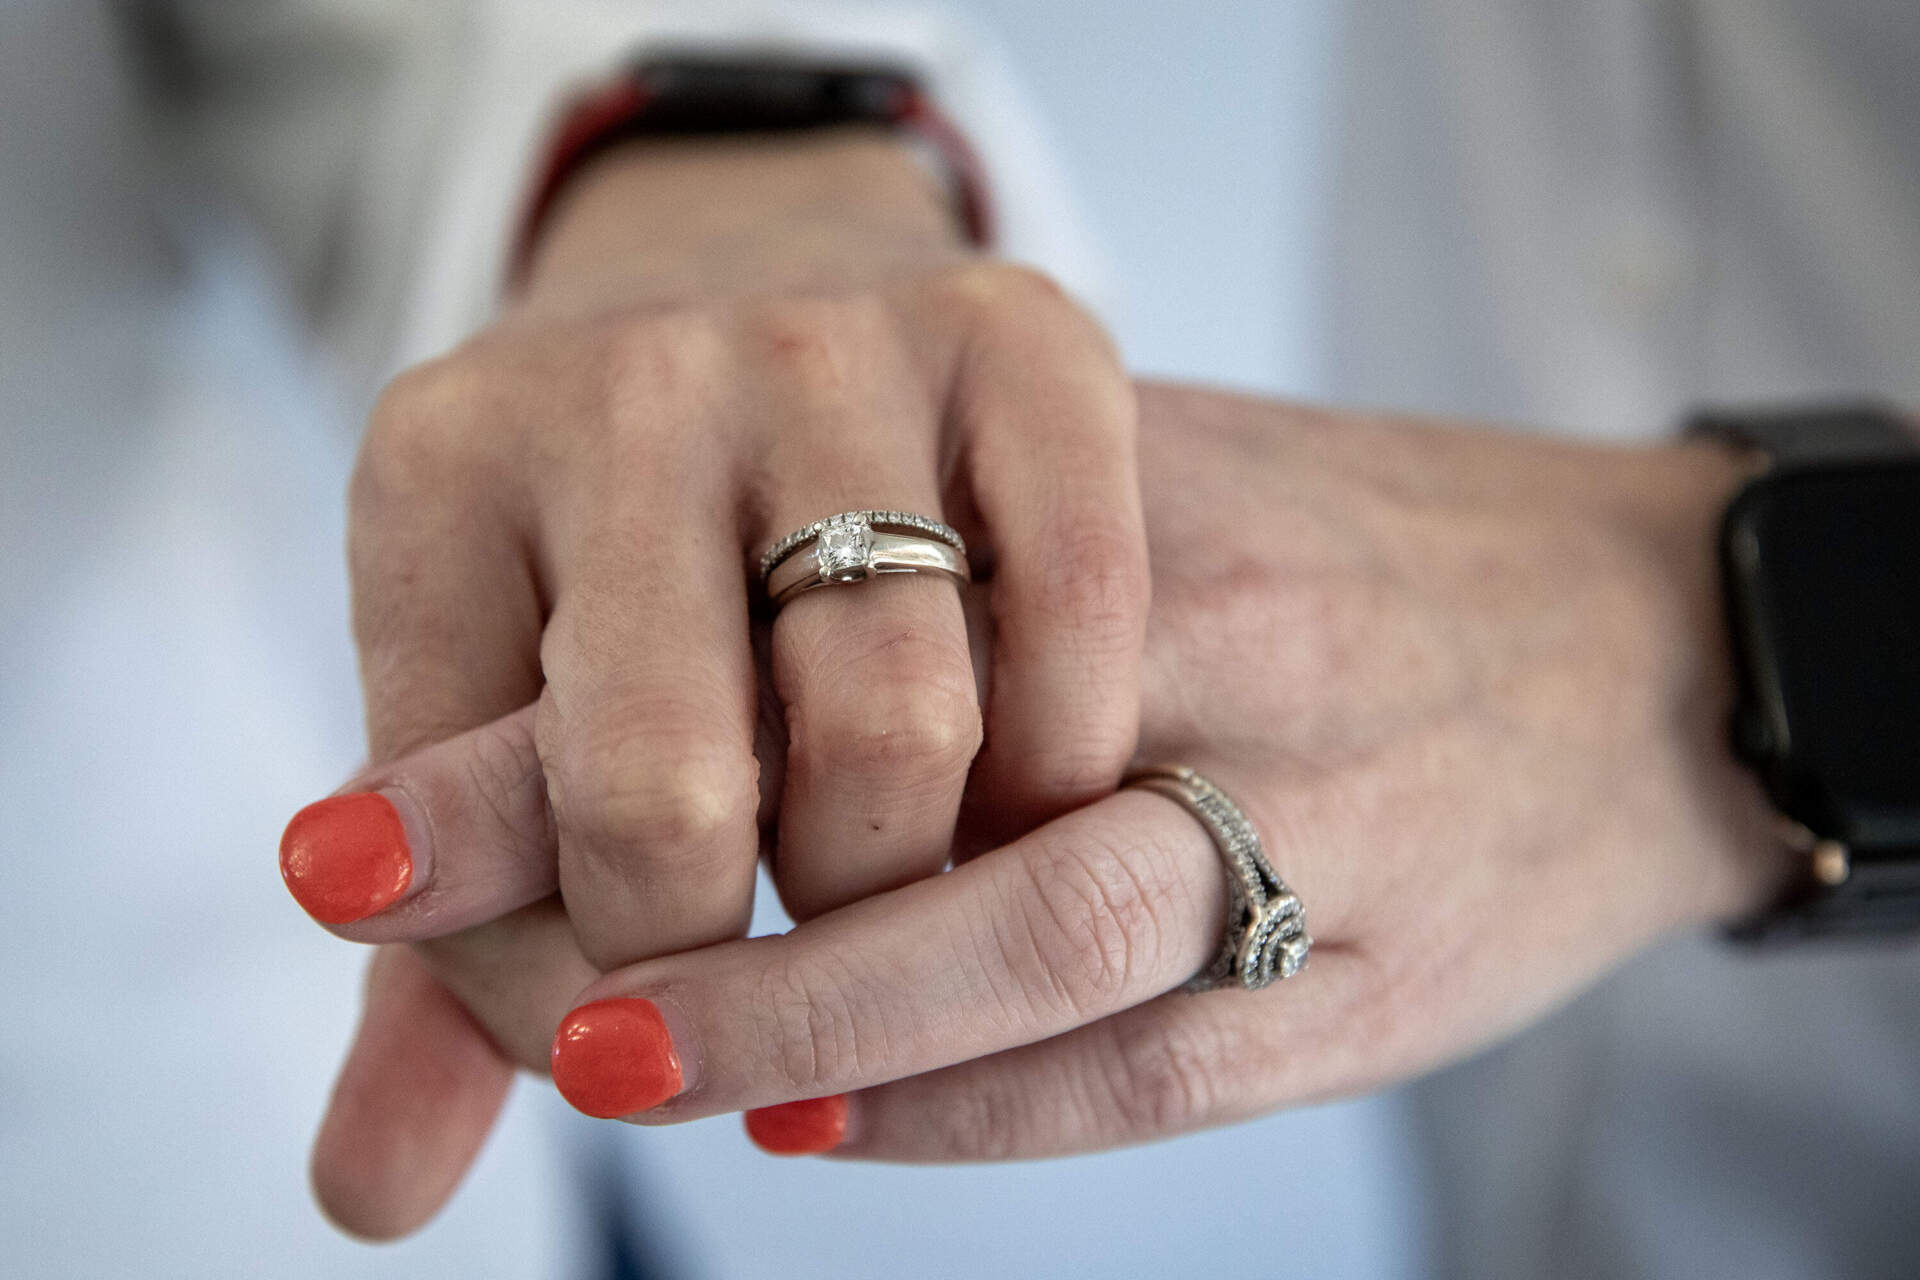 Gaby Leal had to buy a ring for Chelsea Wood online because she proposed during the early days of the pandemic. She knew exactly what ring she wanted from Chelsea Wood in return. (Robin Lubbock/WBUR)